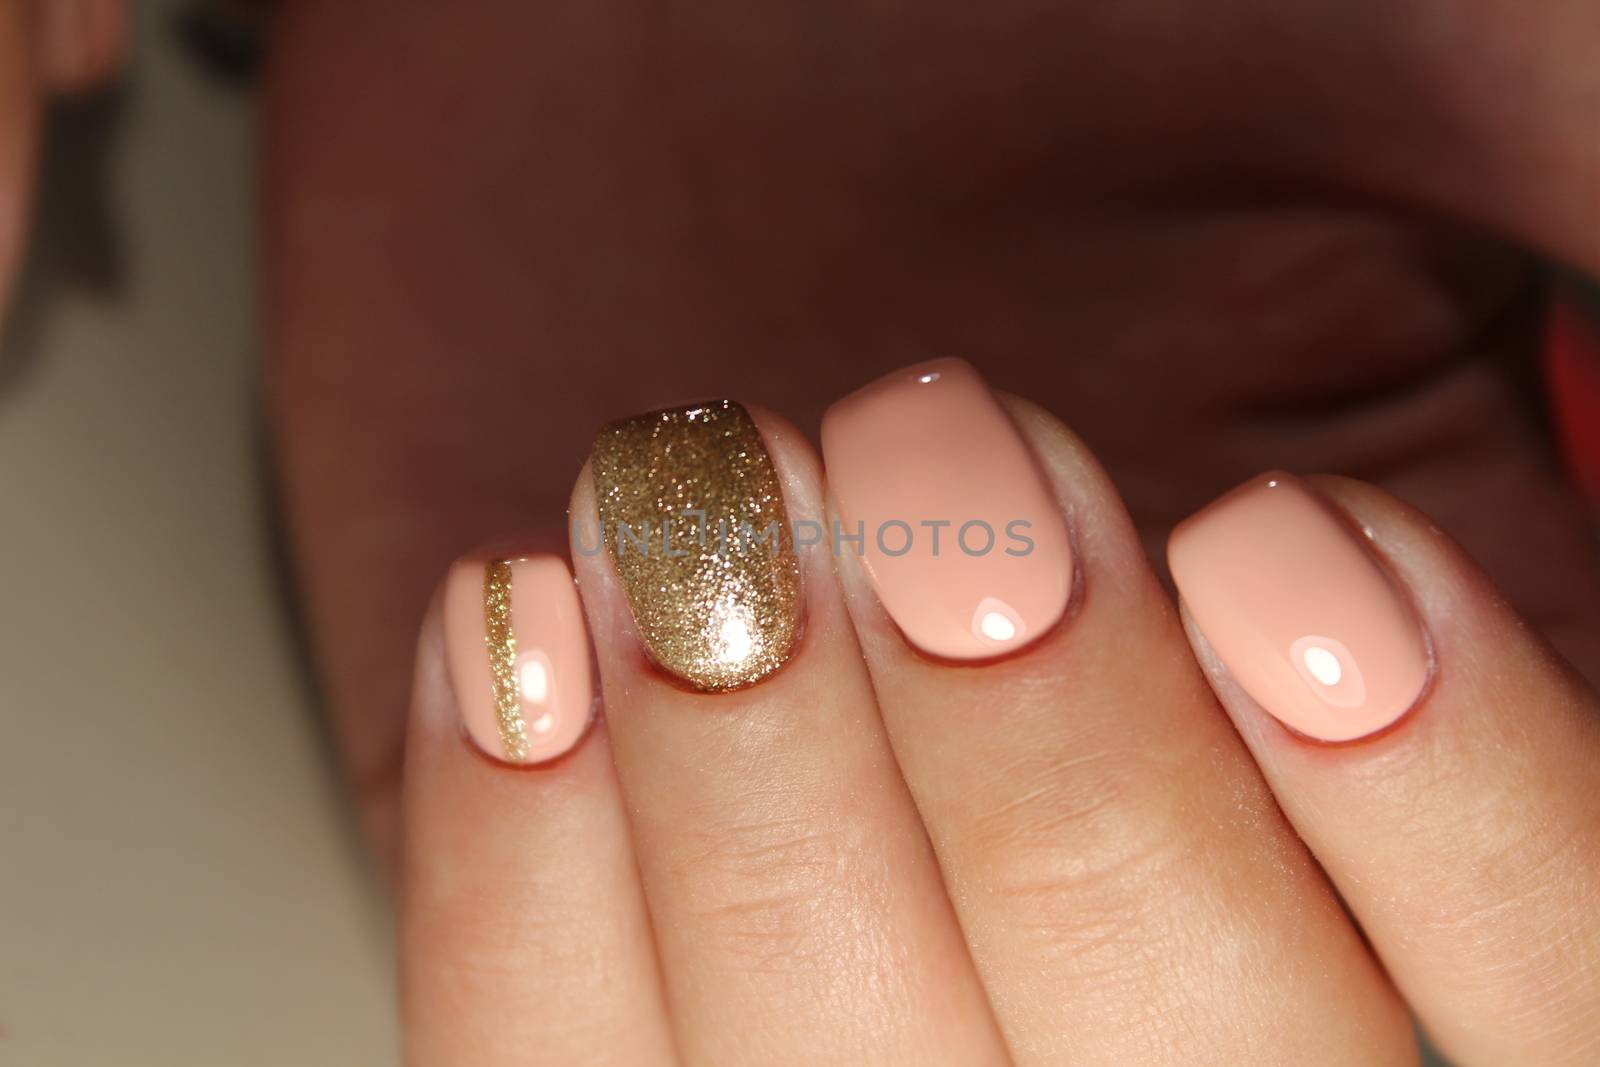 Youth manicure design, color coffee with gold